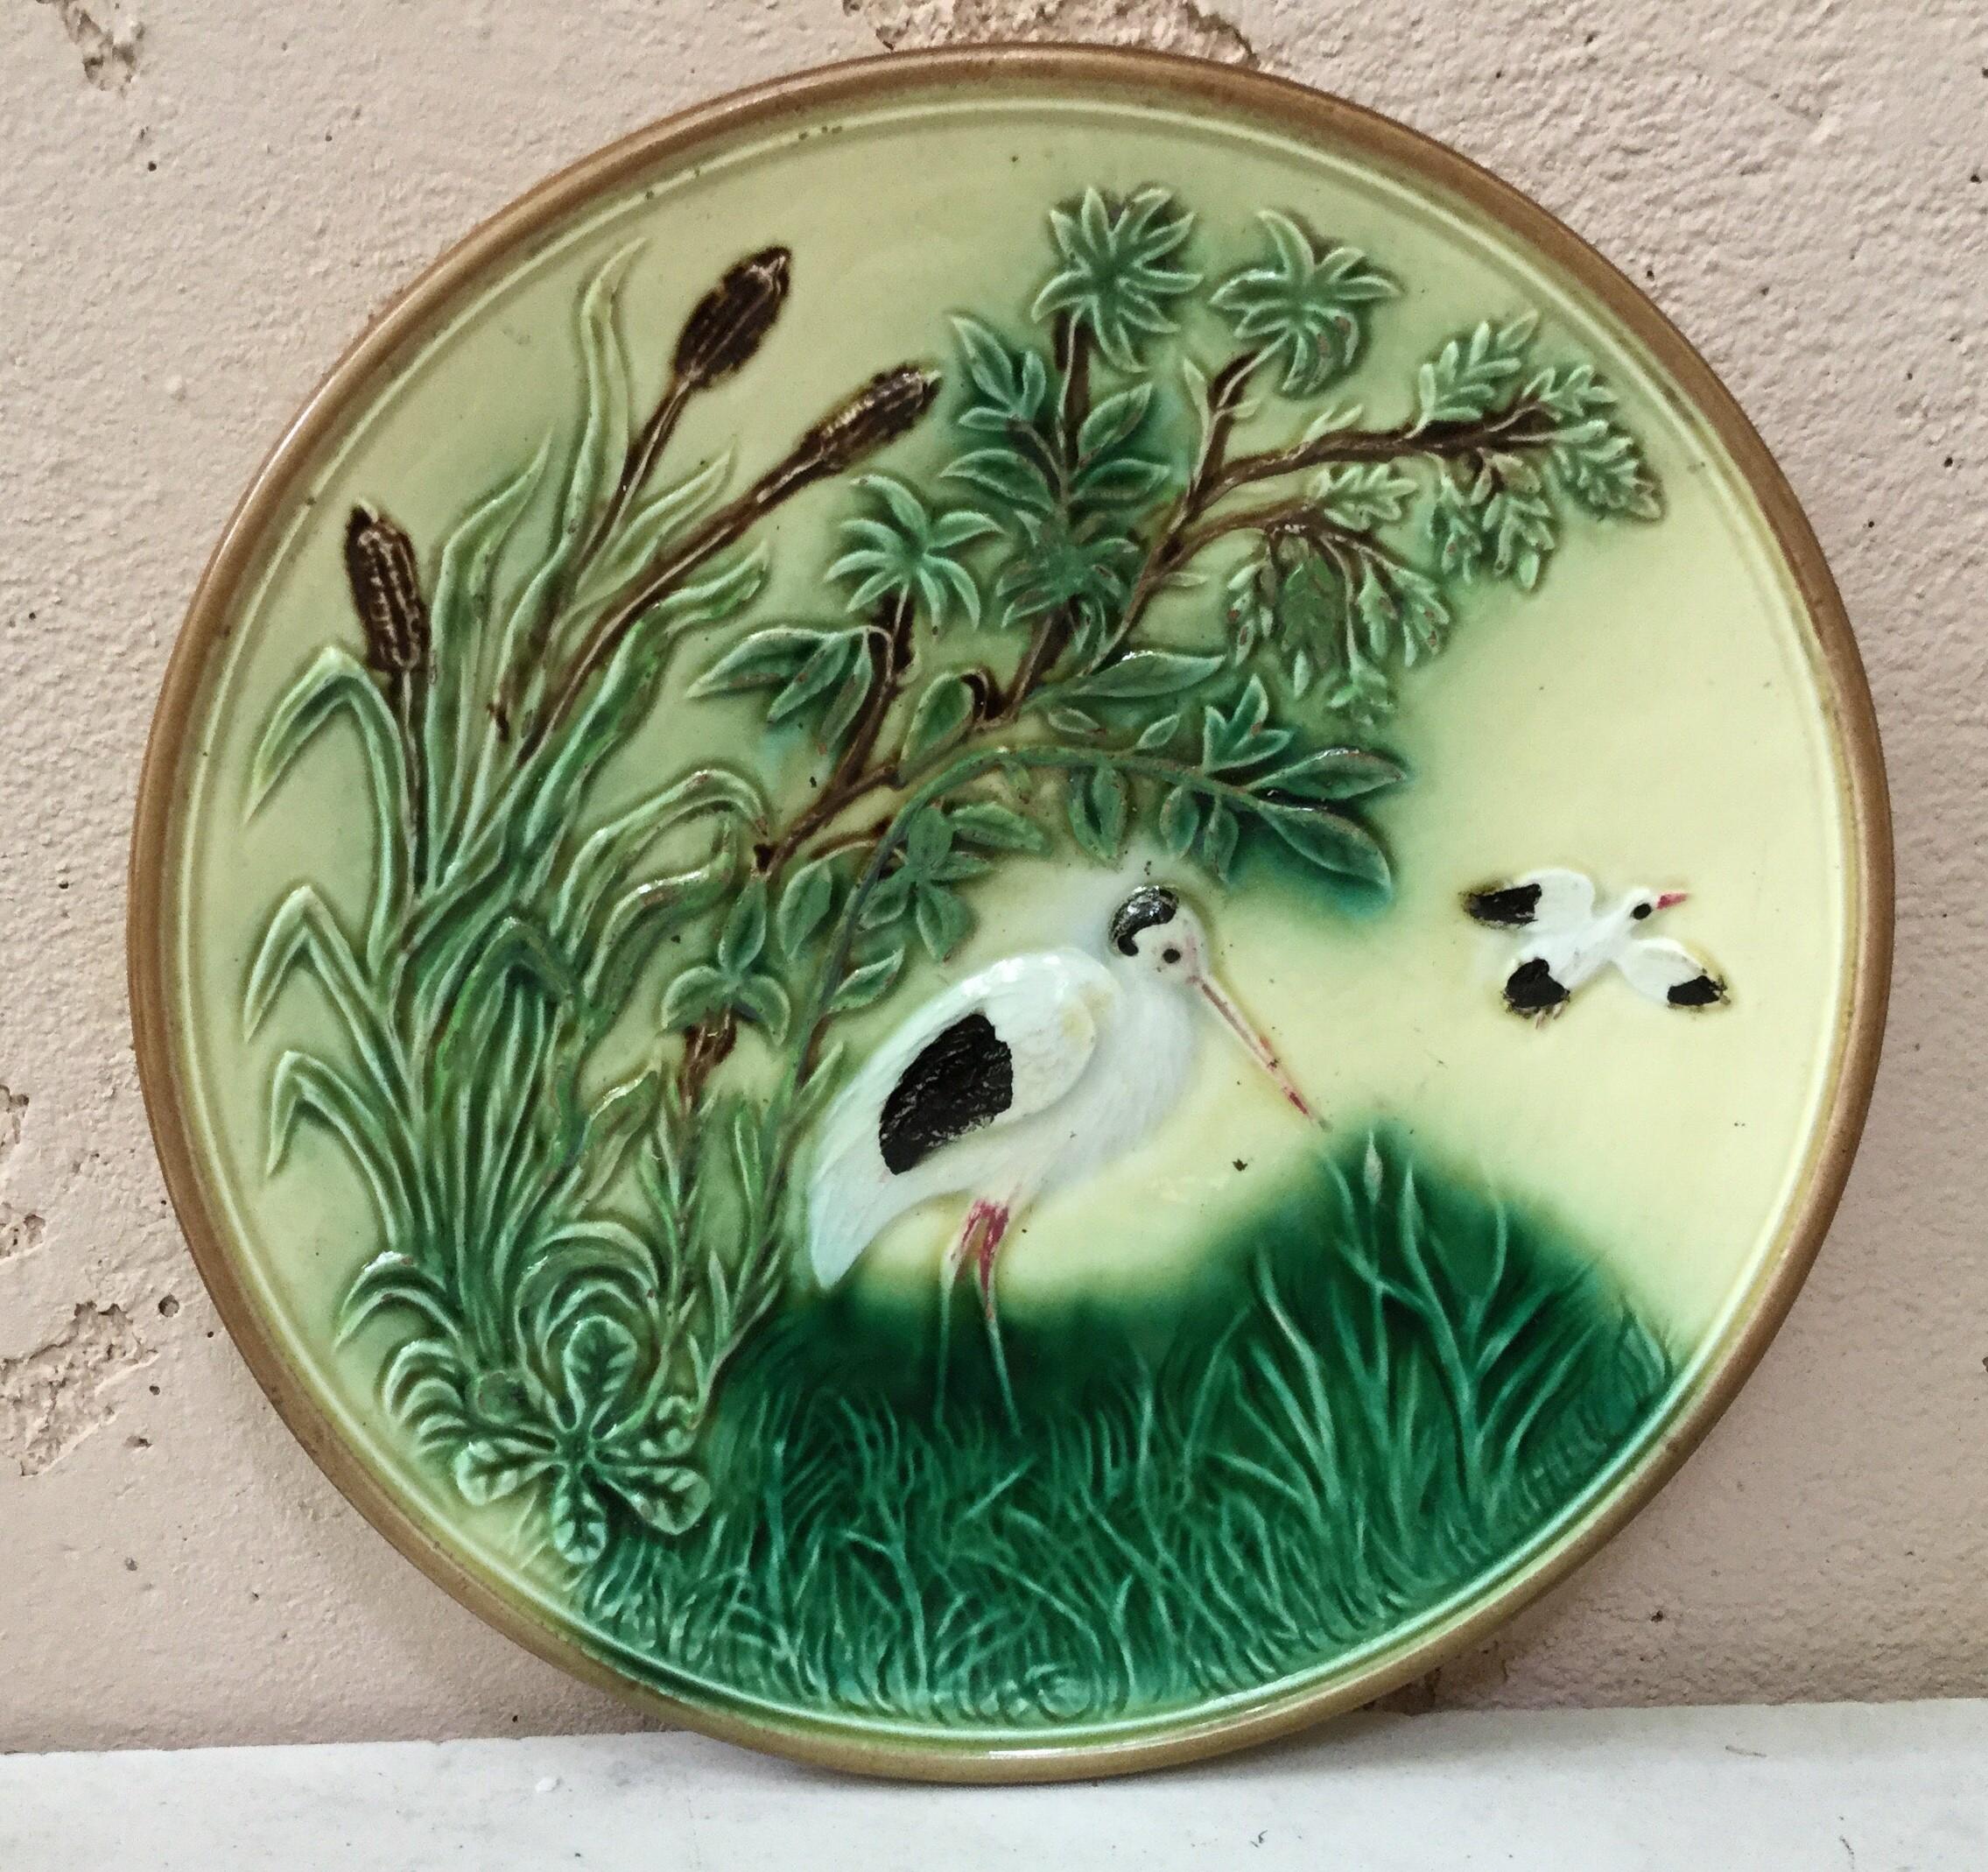 German Majolica stork plate with reeds and trees. circa 1900.